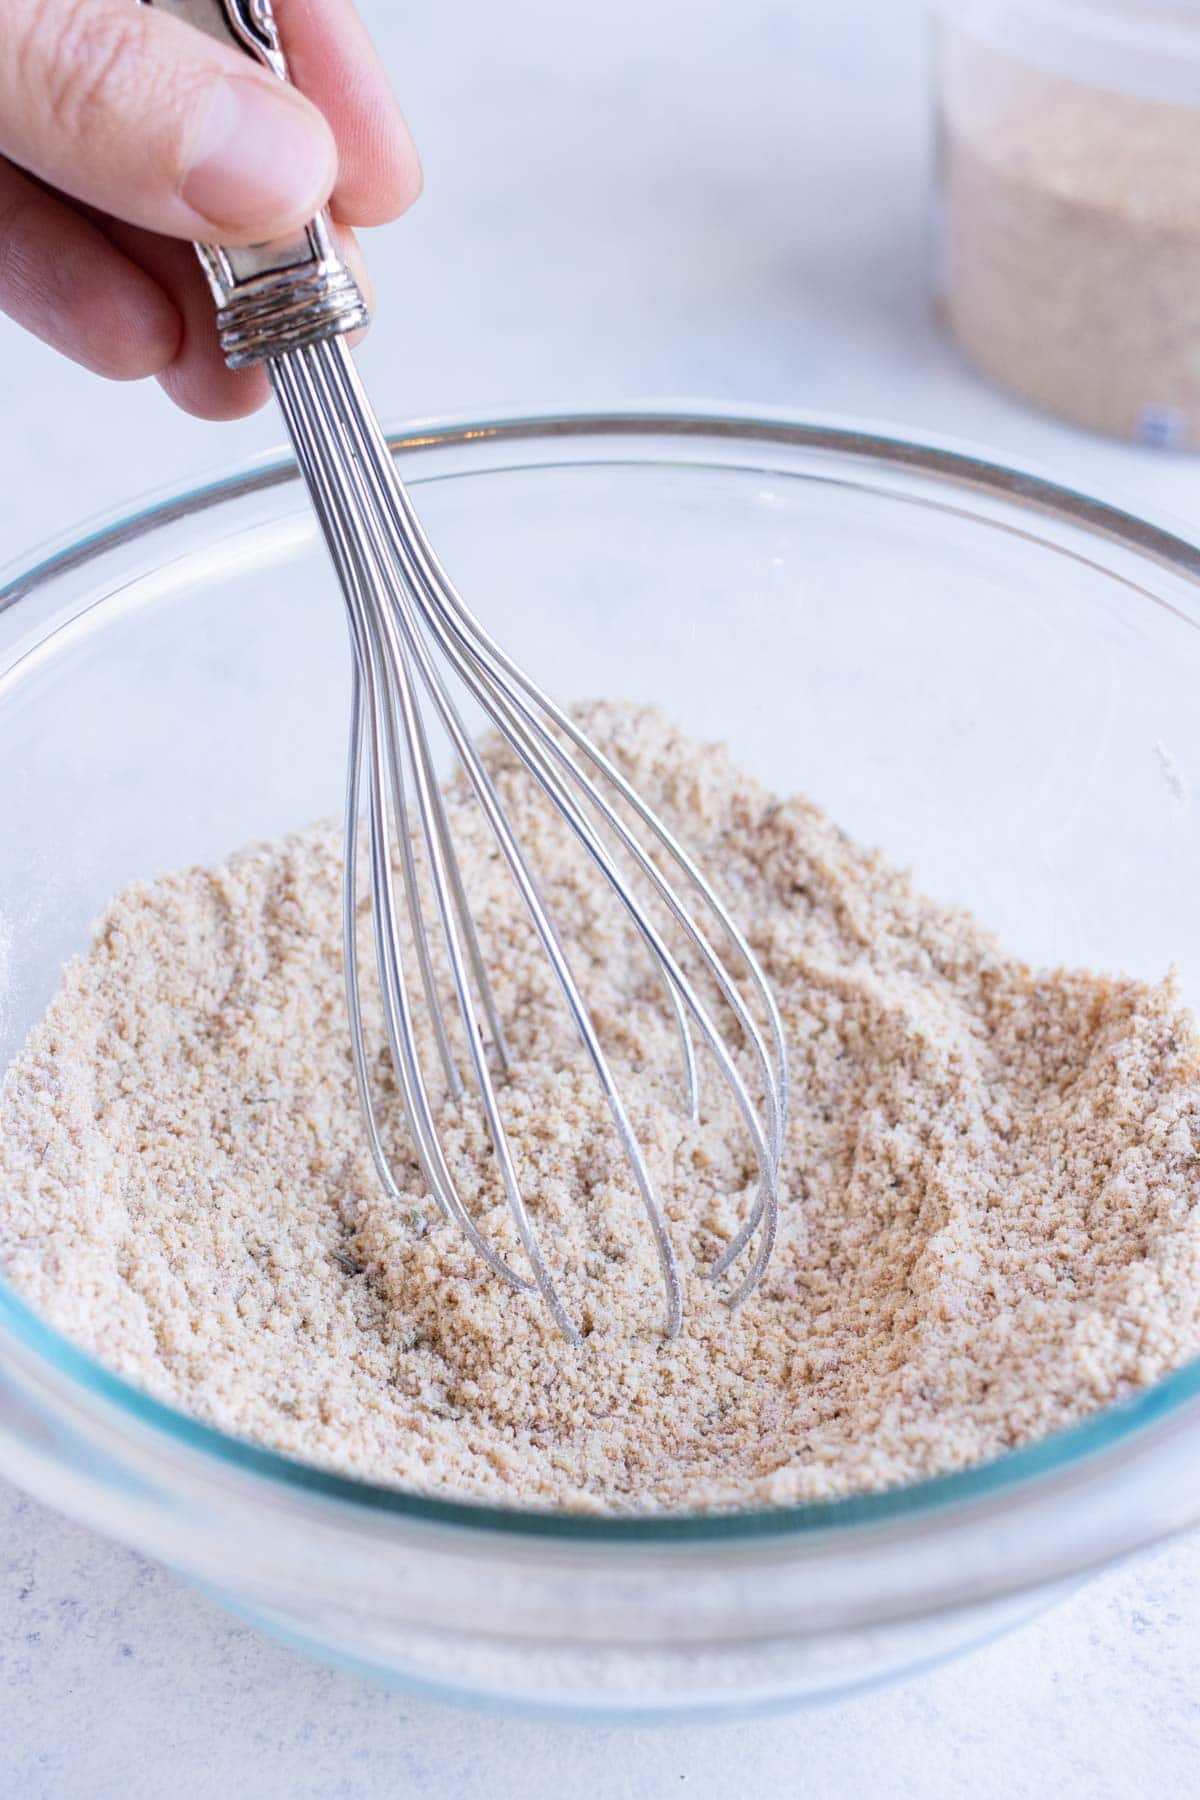 Dry ingredients are combined in a bowl with a whisk.